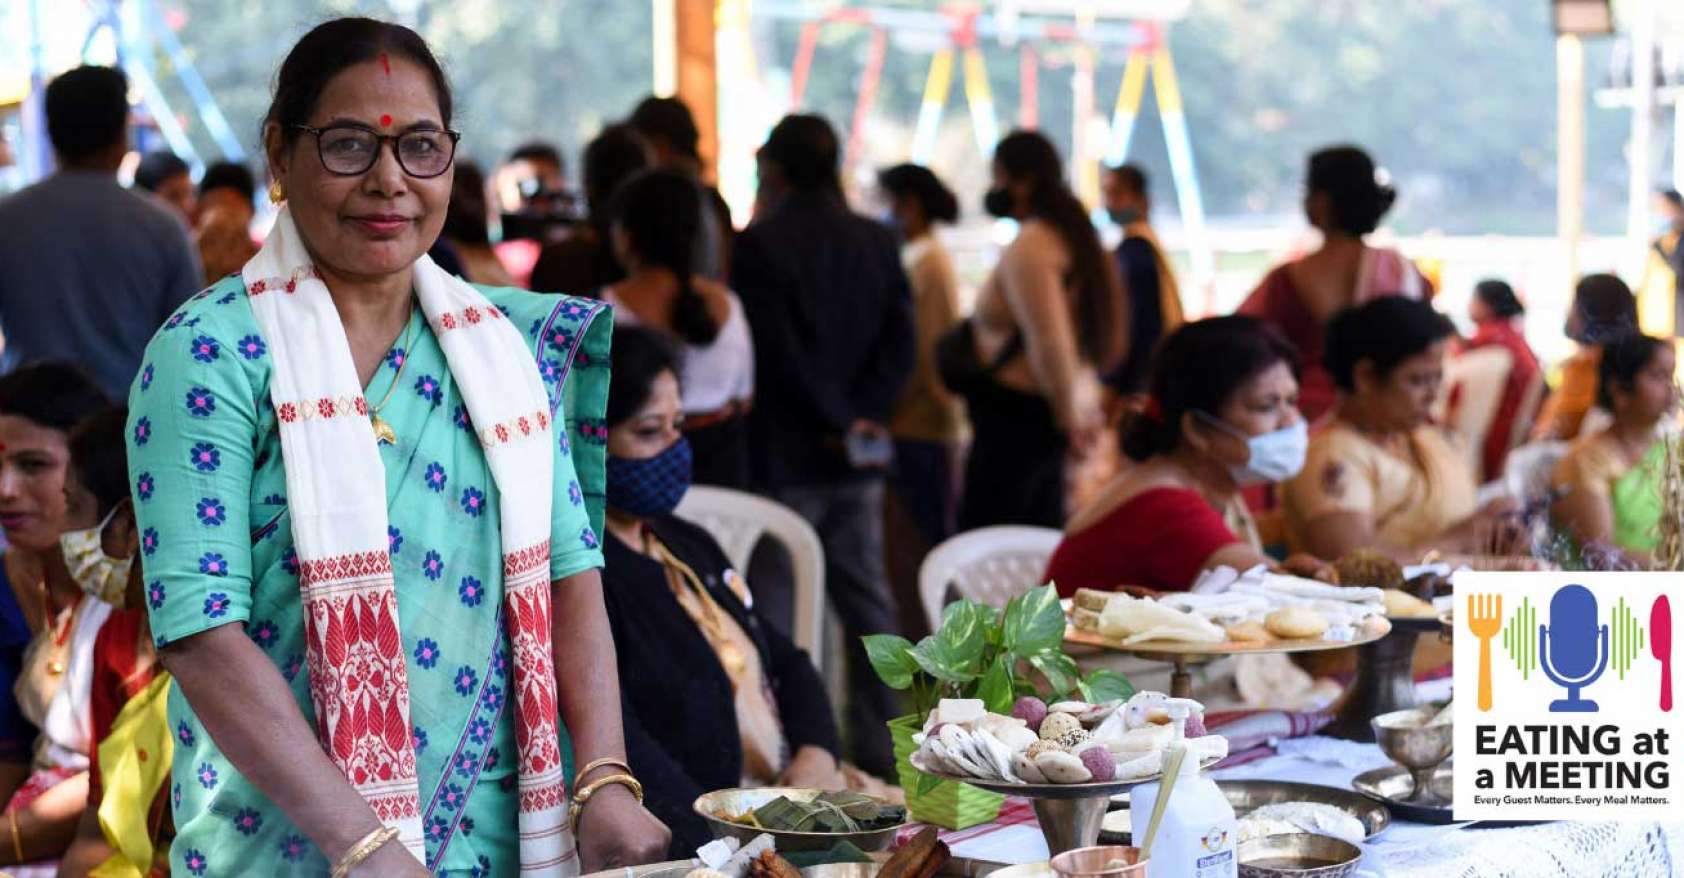 Indian woman standing behind a table of food showcasing the culture and community of eating together